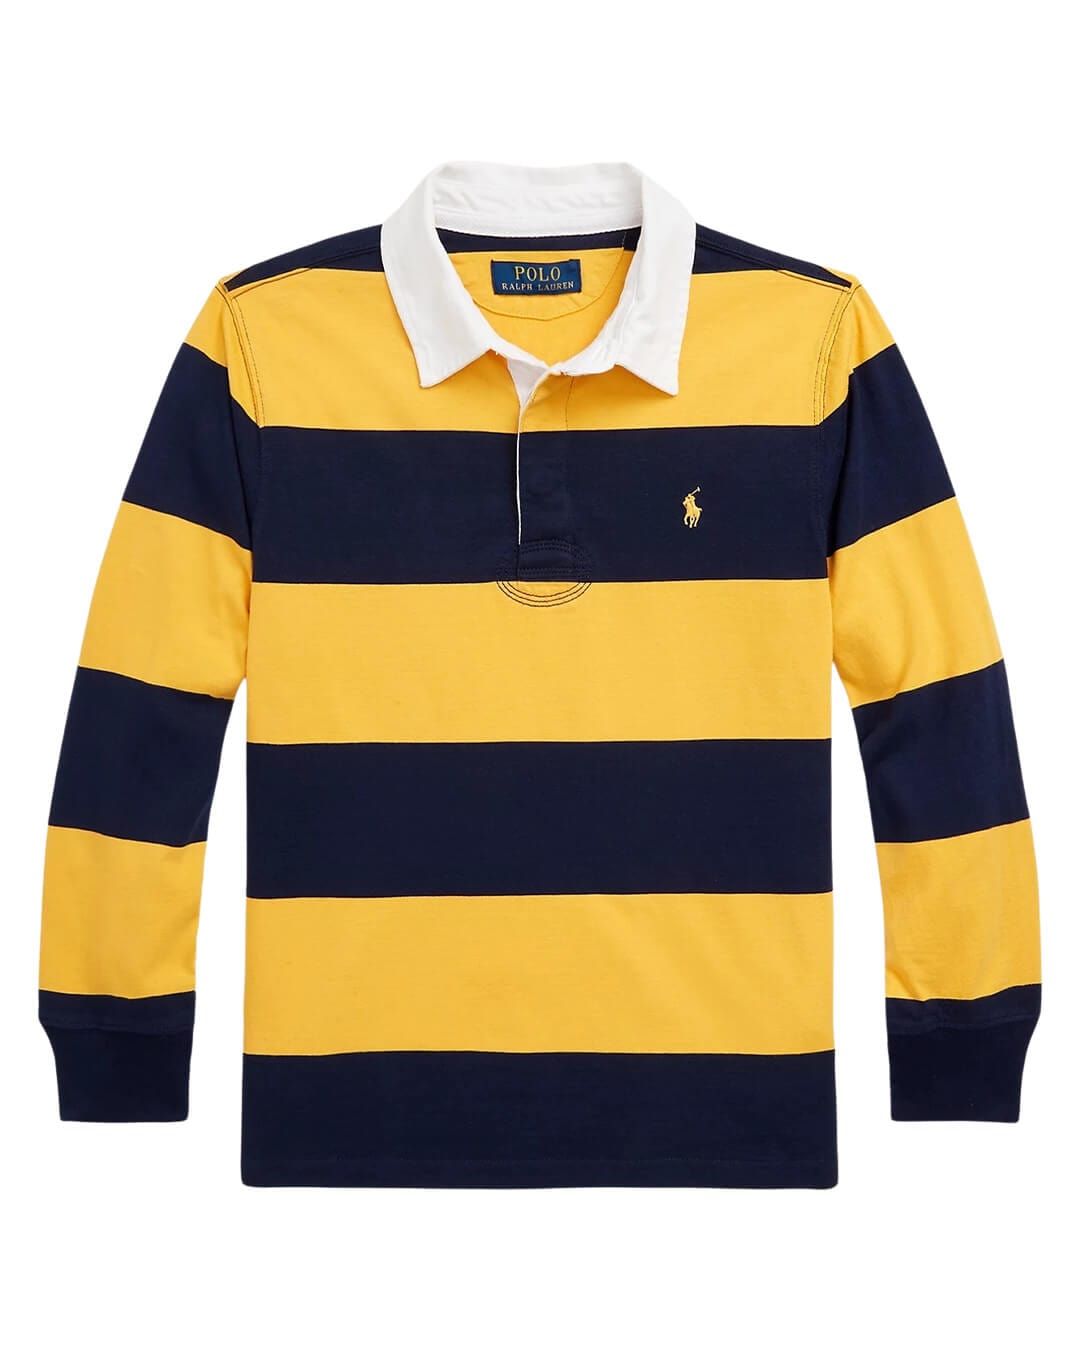 Polo Ralph Lauren Polo Shirts Boys Polo Ralph Lauren Yellow And Navy Striped Cotton Jersey Rugby Shirt